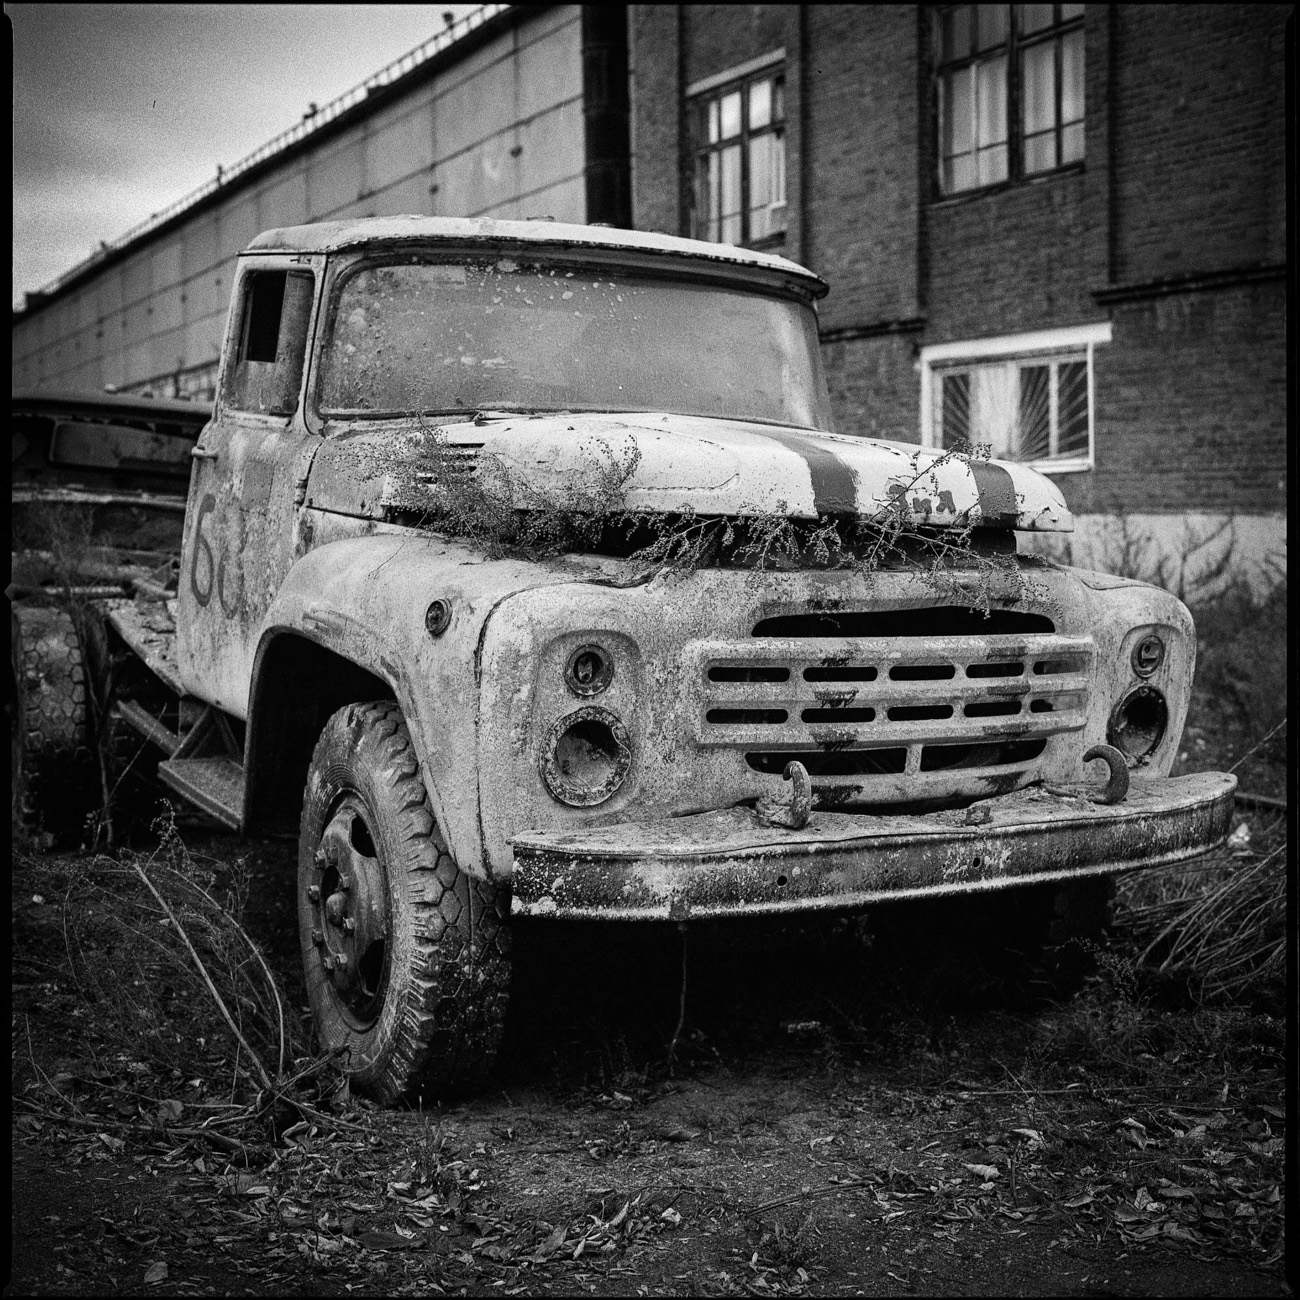 An abandoned ZIL 130 awaits its turn for the scrap heap. Back in 1963, it was one of the most modern trucks of its time. It was even given the USSR mark of quality.